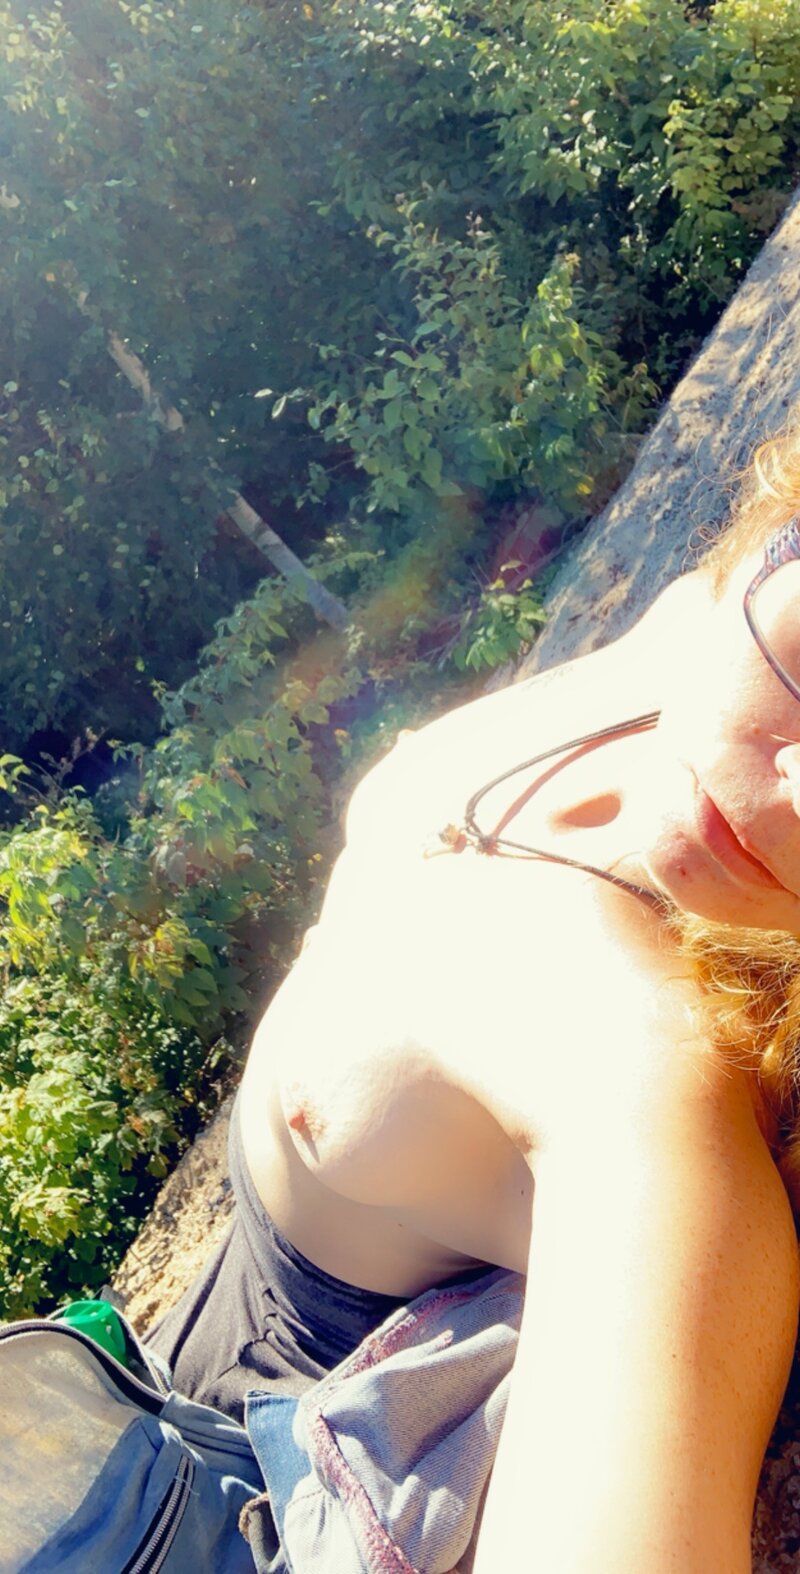 You find her in the woods alone sunbathing.... picture